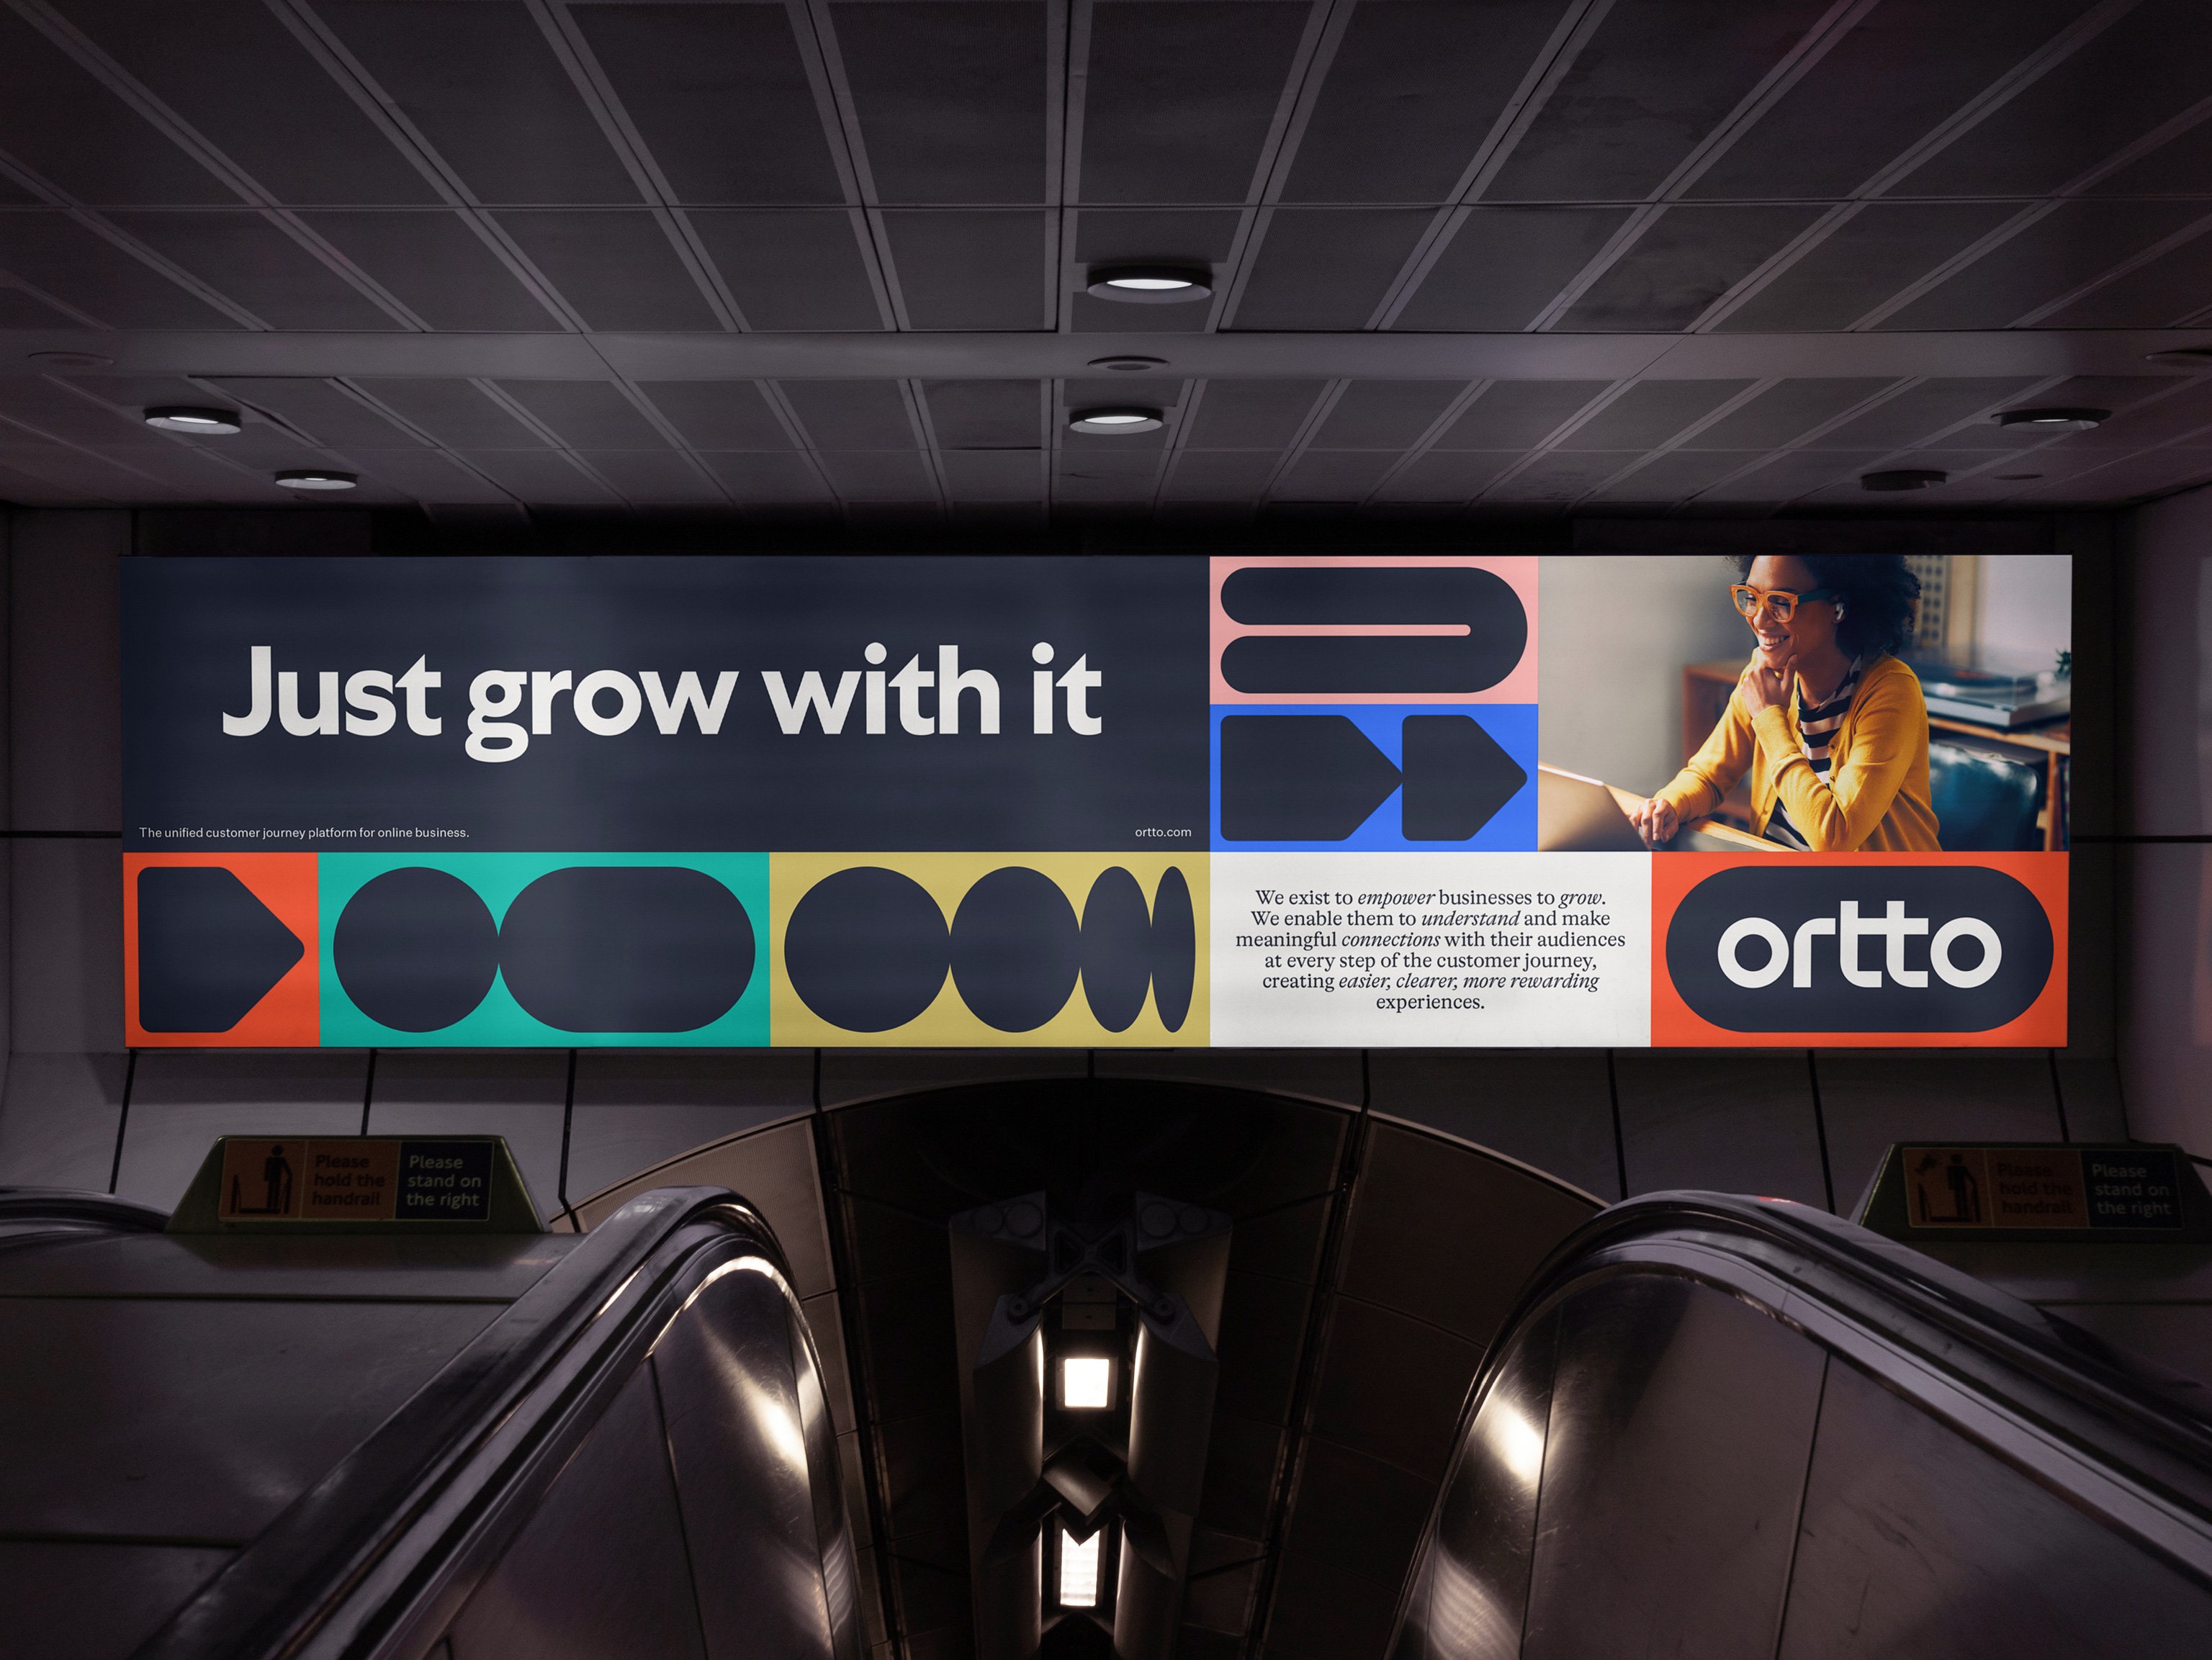 Brand identity and OOH advertising poster for automation, analytics and customer journey company Ortto designed by Christopher Doyle & Co